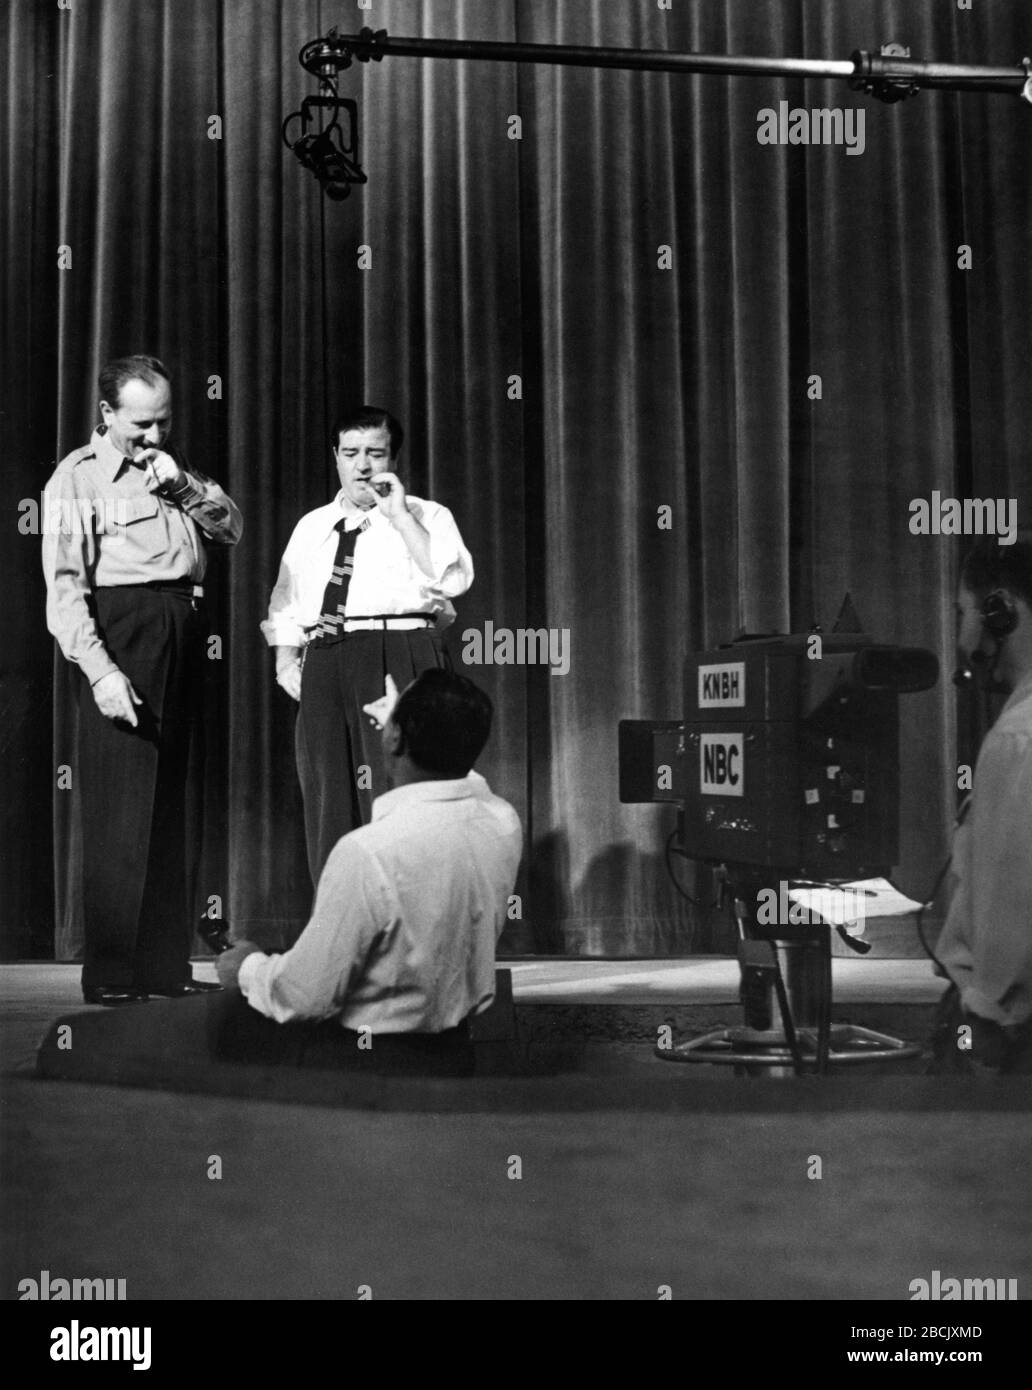 BUD ABBOTT and LOU COSTELLO with Director circa 1953 on set candid filming THE ABBOTT AND COSTELLO SHOW TV Series 1952-1957 for Television Corporation of America / National Broadcasting Corporation (NBC) Stock Photo